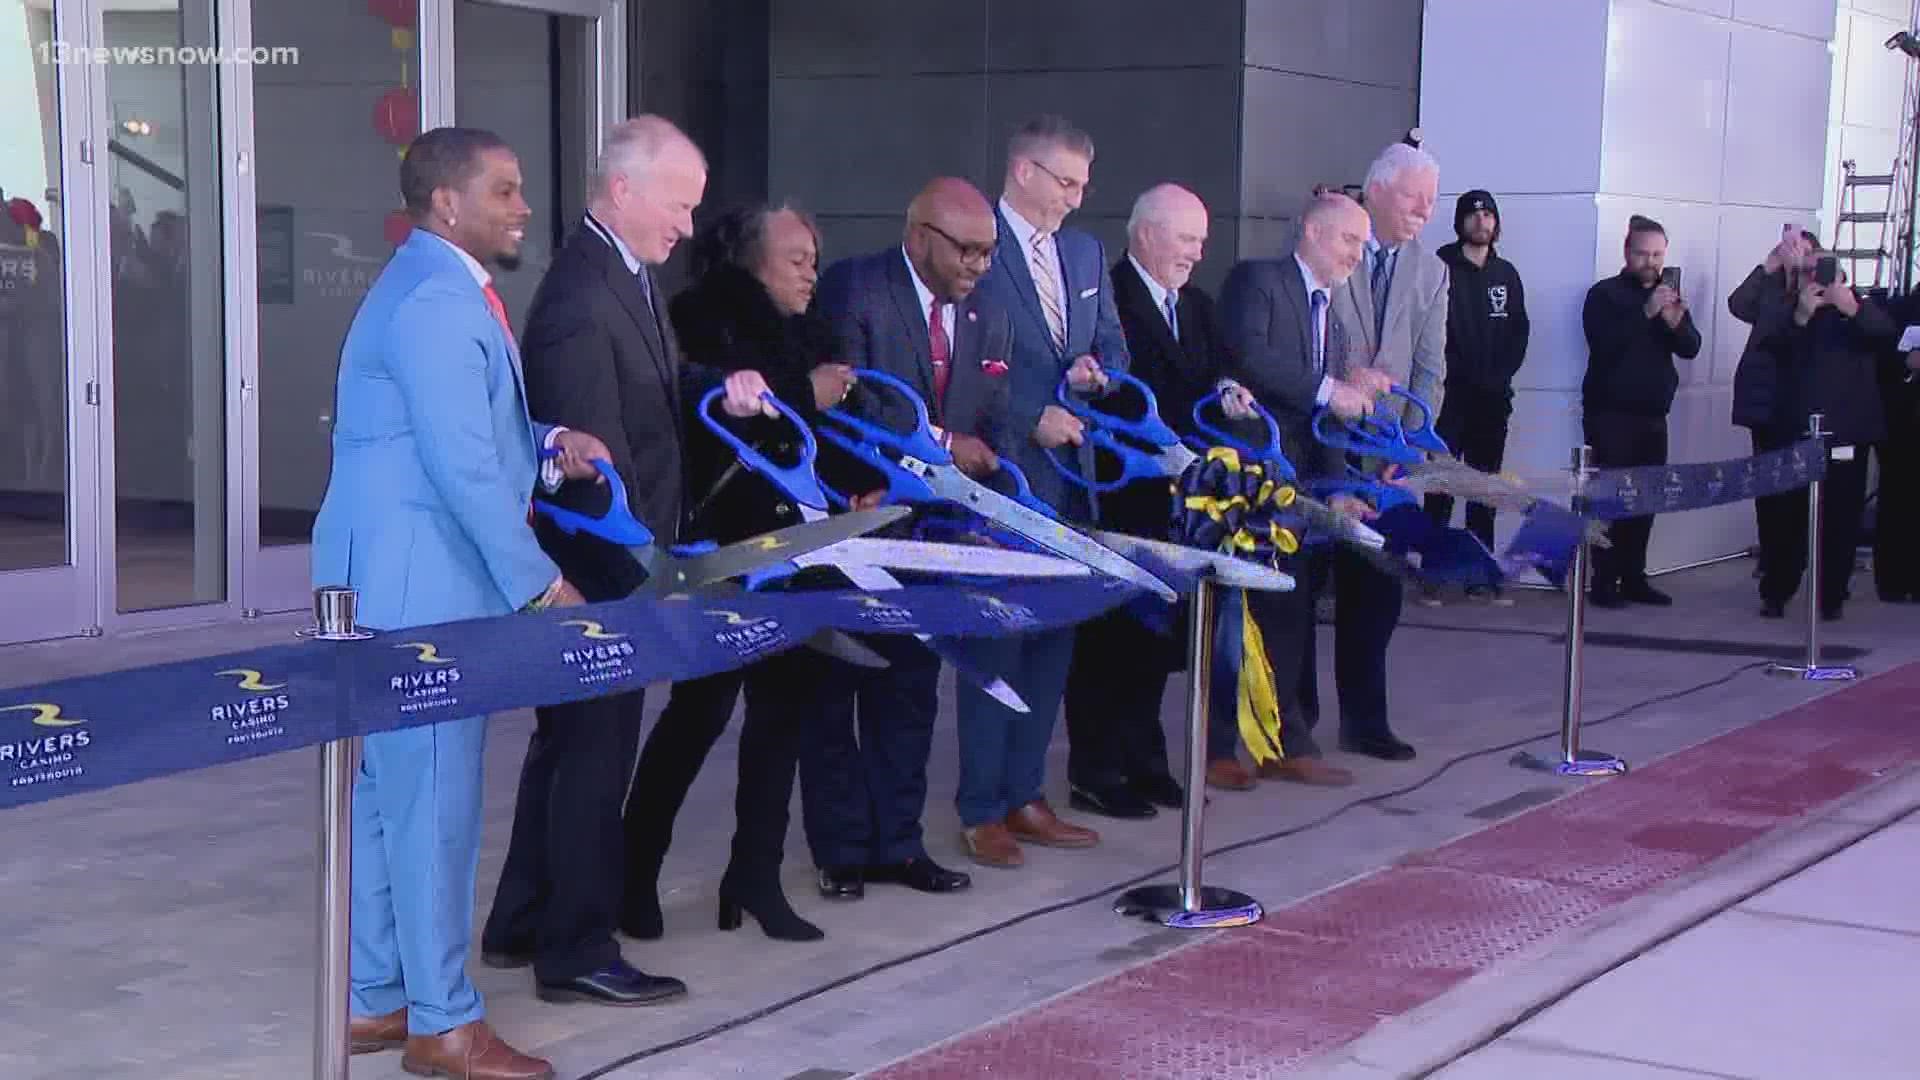 The first gaming facility of its kind in the Commonwealth is officially open, bringing new jobs and revenue for the city and a renewed sense of excitement.